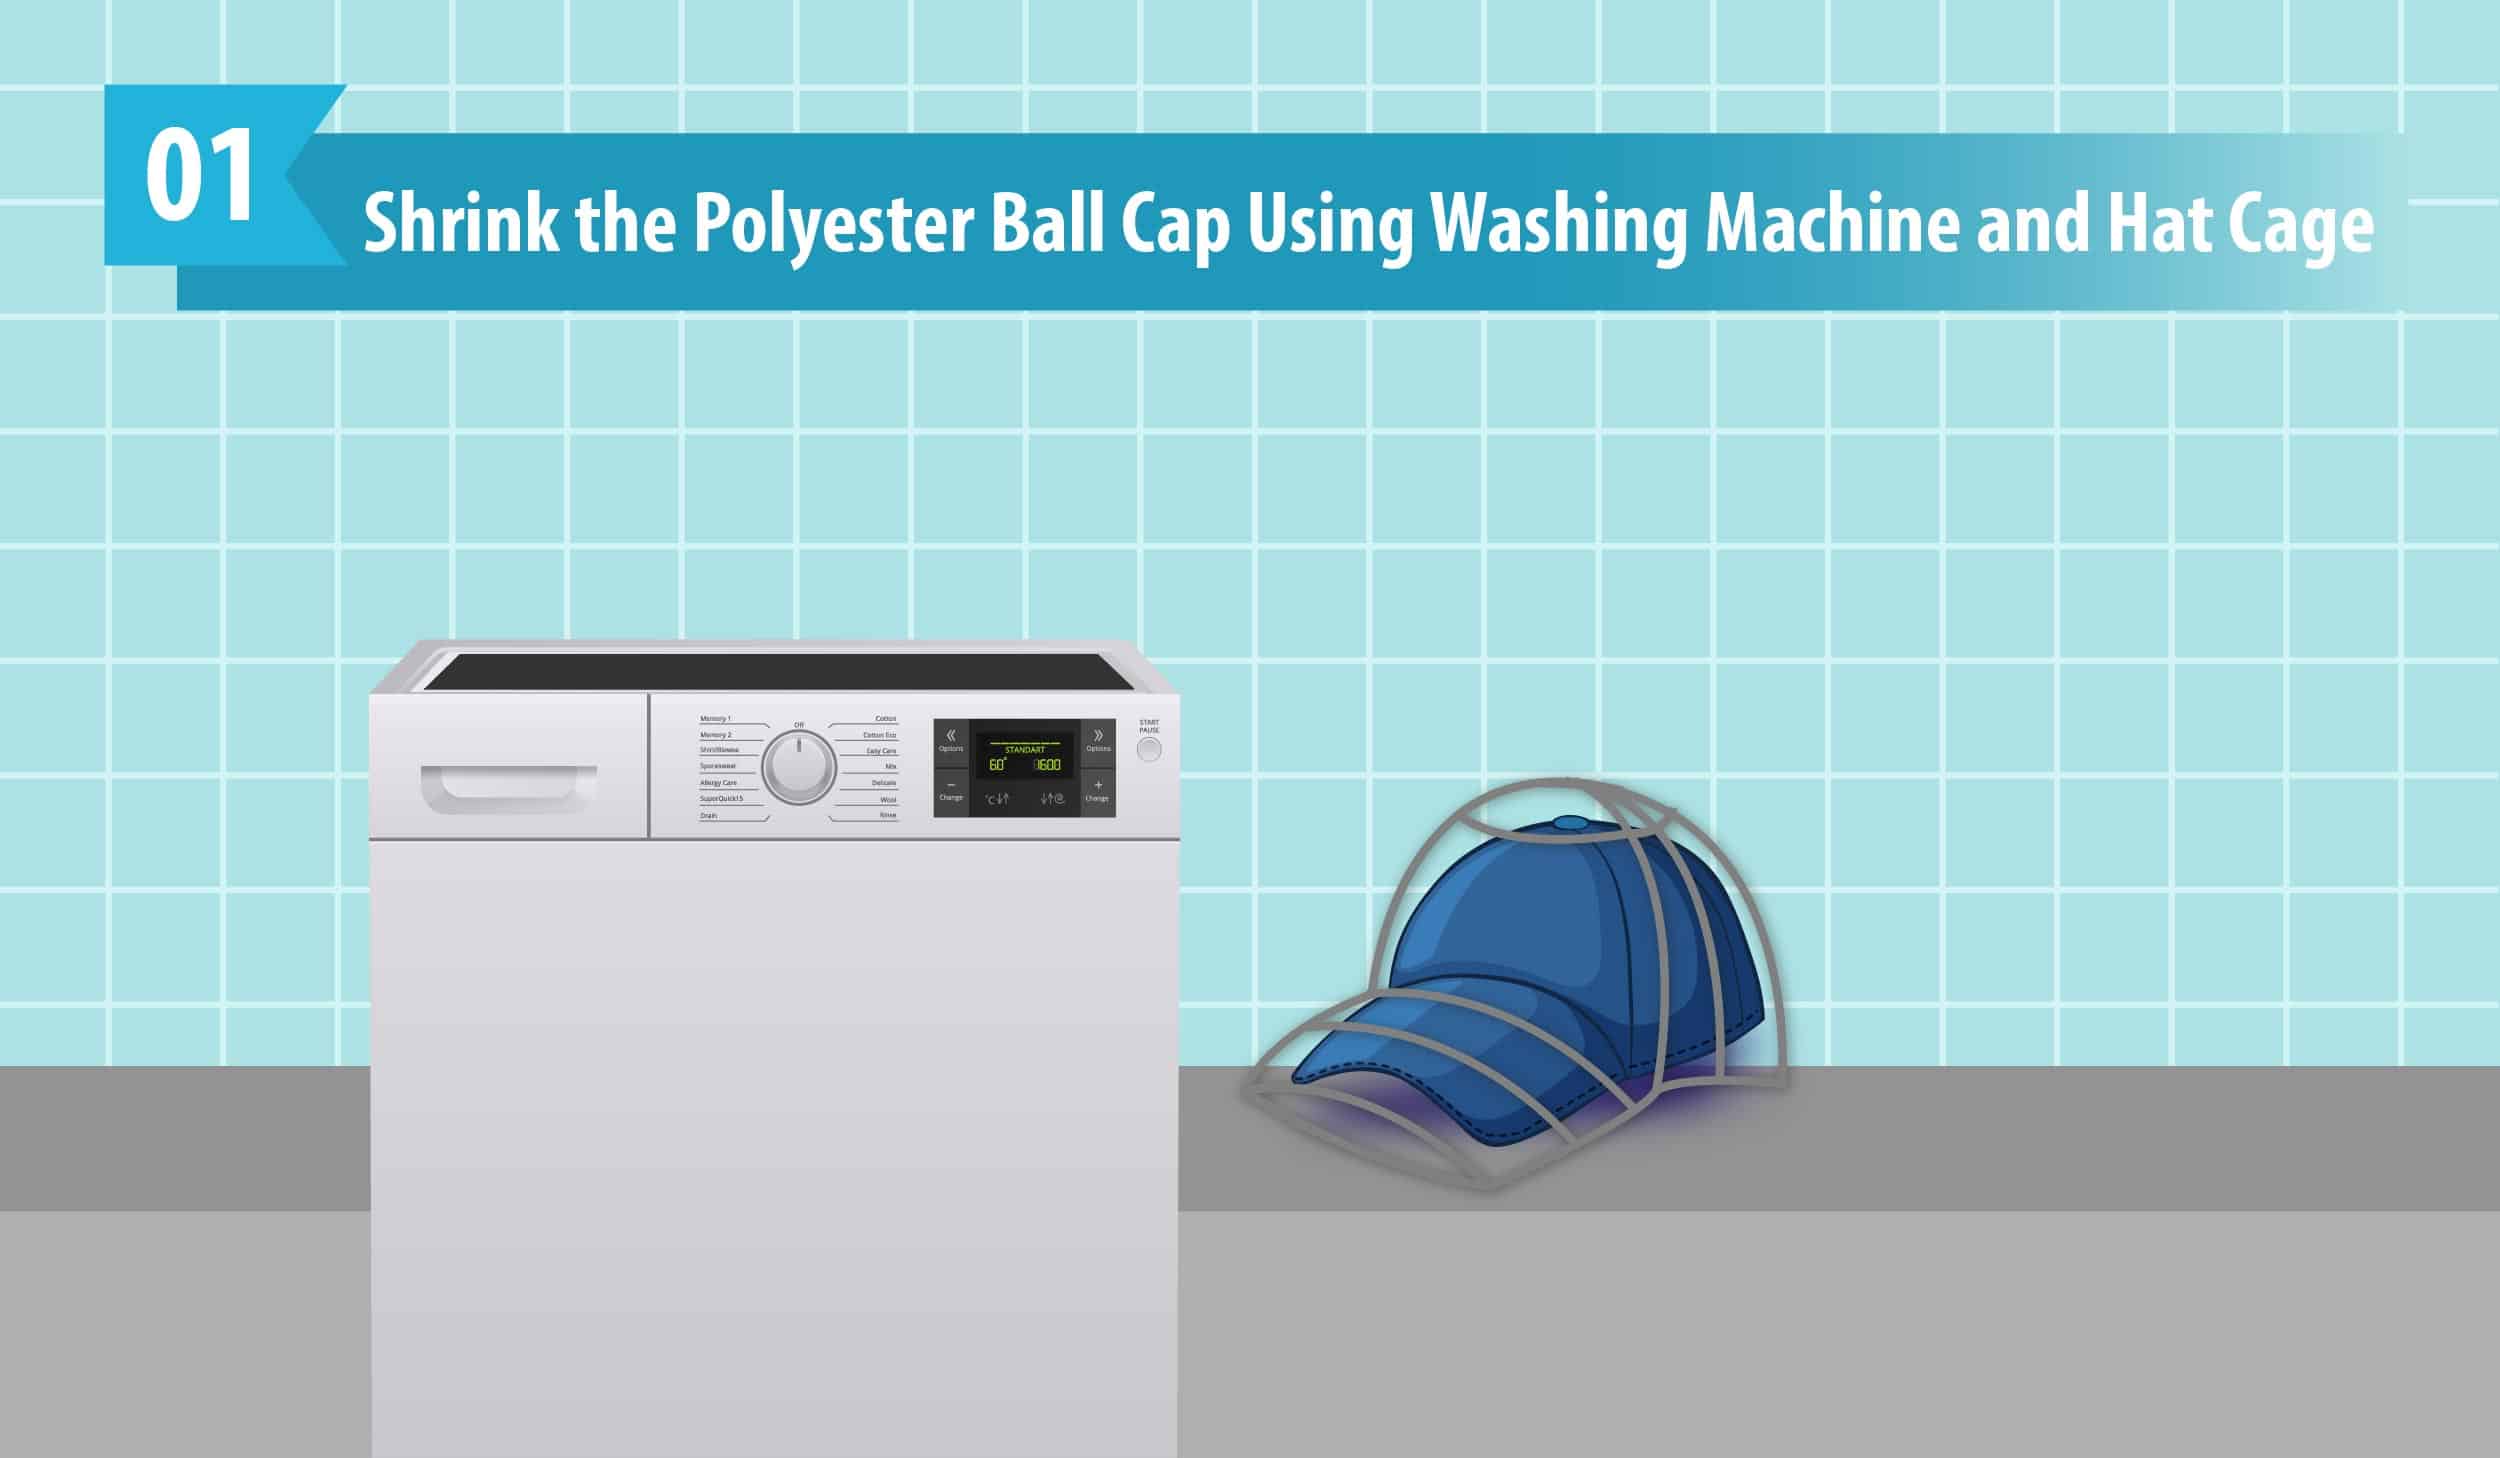 Shrink the Polyester Ball Cap Using Washing Machine and Hat Cage